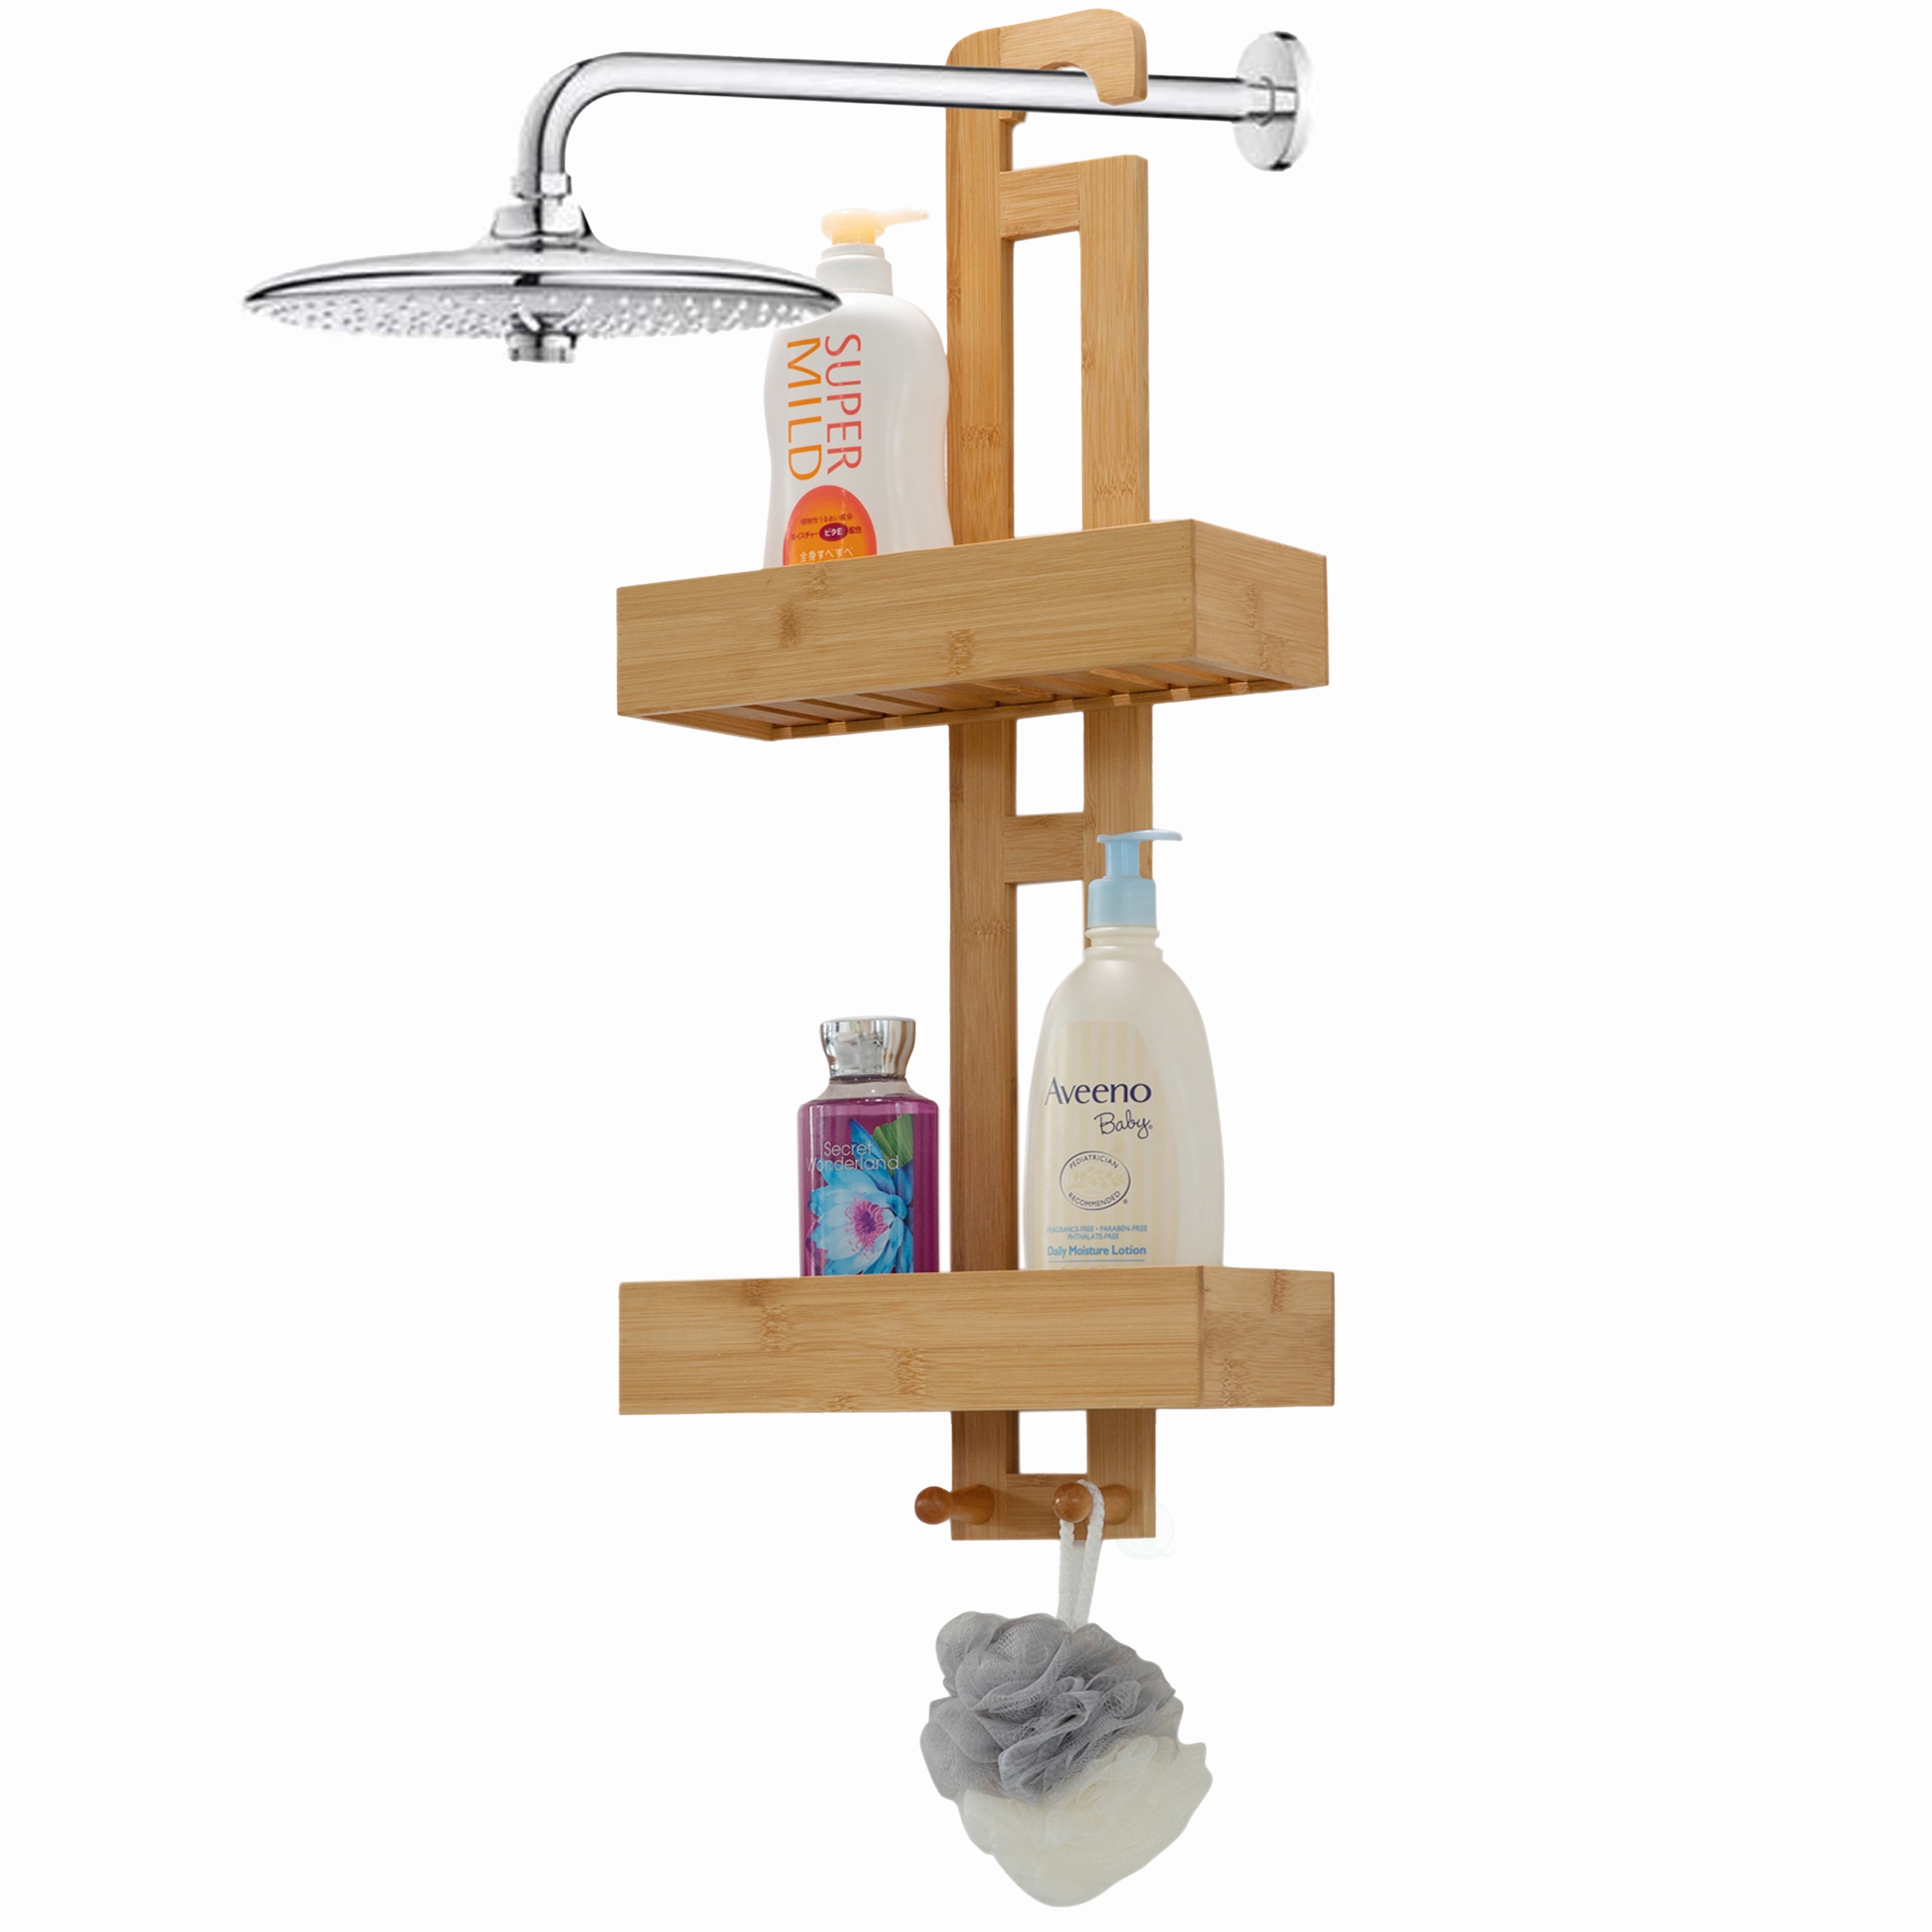 https://ak1.ostkcdn.com/images/products/is/images/direct/bcc028229faf278ac785706d0e4ce4139e87dac7/Bathroom-Multi-function-Natural-Bamboo-Storage-Rack-Over-Shower-Head-Organizer%2C-Shower-Ball%2C-Shampoo%2C-Conditioner%2C-Soap-Holder.jpg